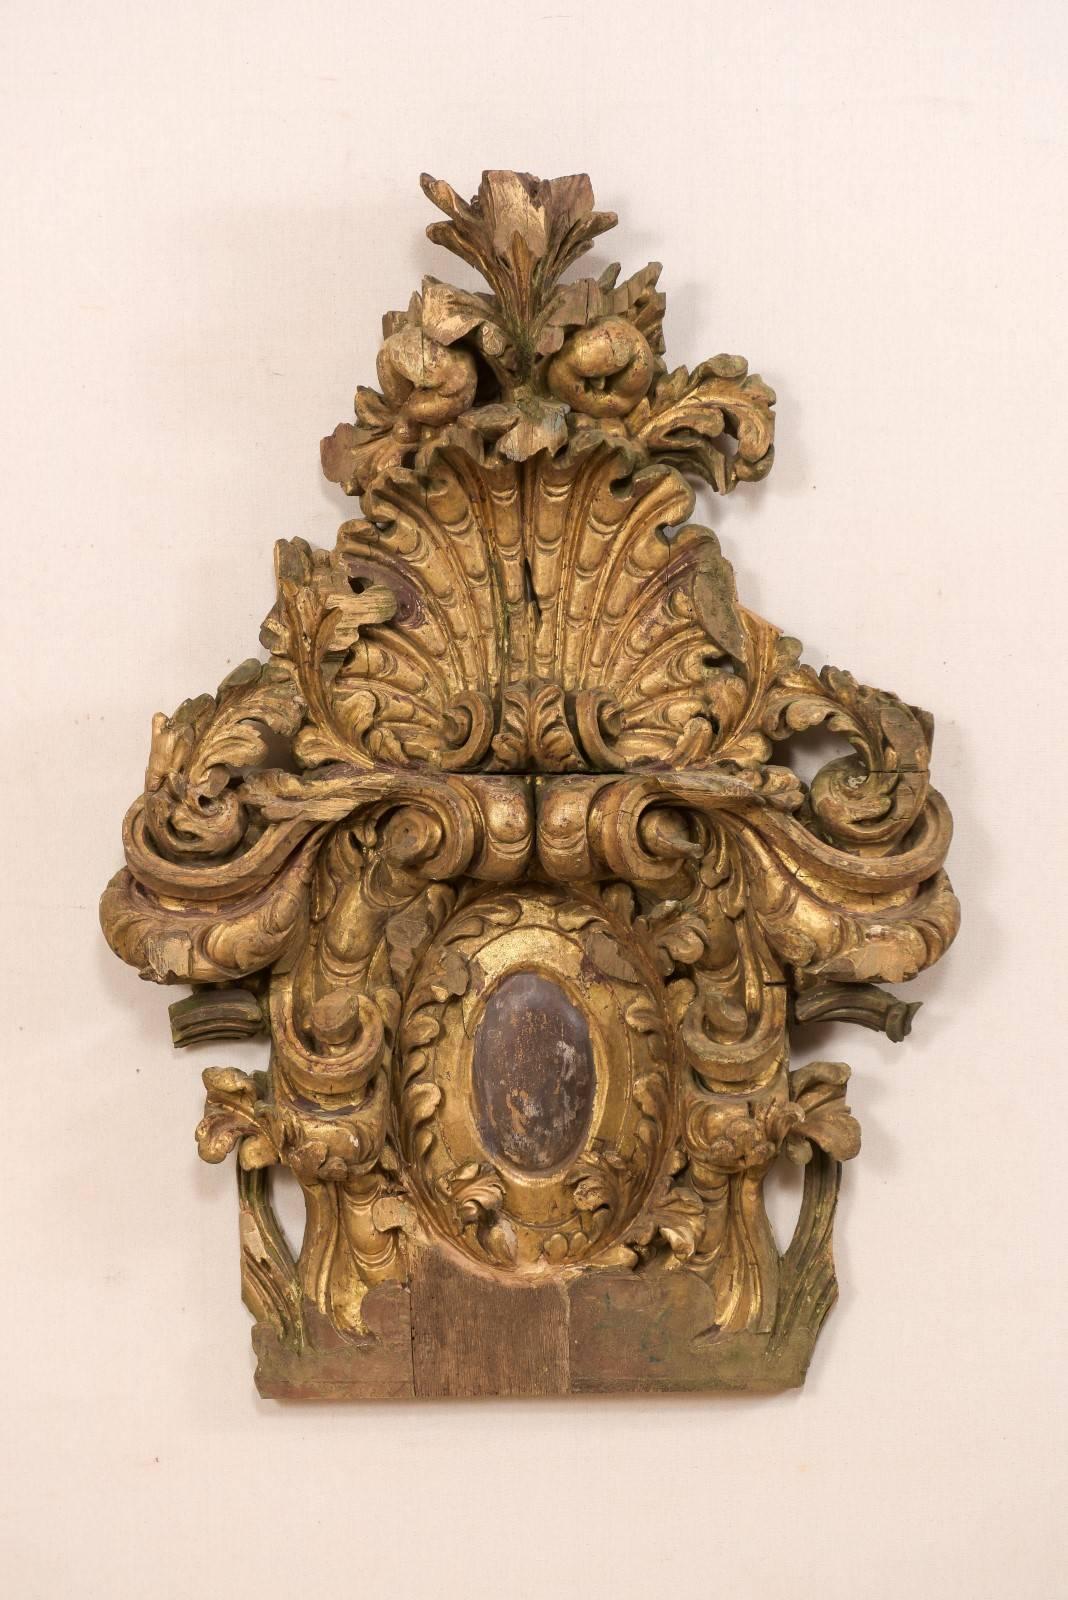 An Italian 18th century Rococo carved wood fragment. This antique wall decoration from Italy features fabulously detailed three dimensional hand carvings in a shell and scrolling acanthus leaf motif. The upper crest is raised to an impressive peak